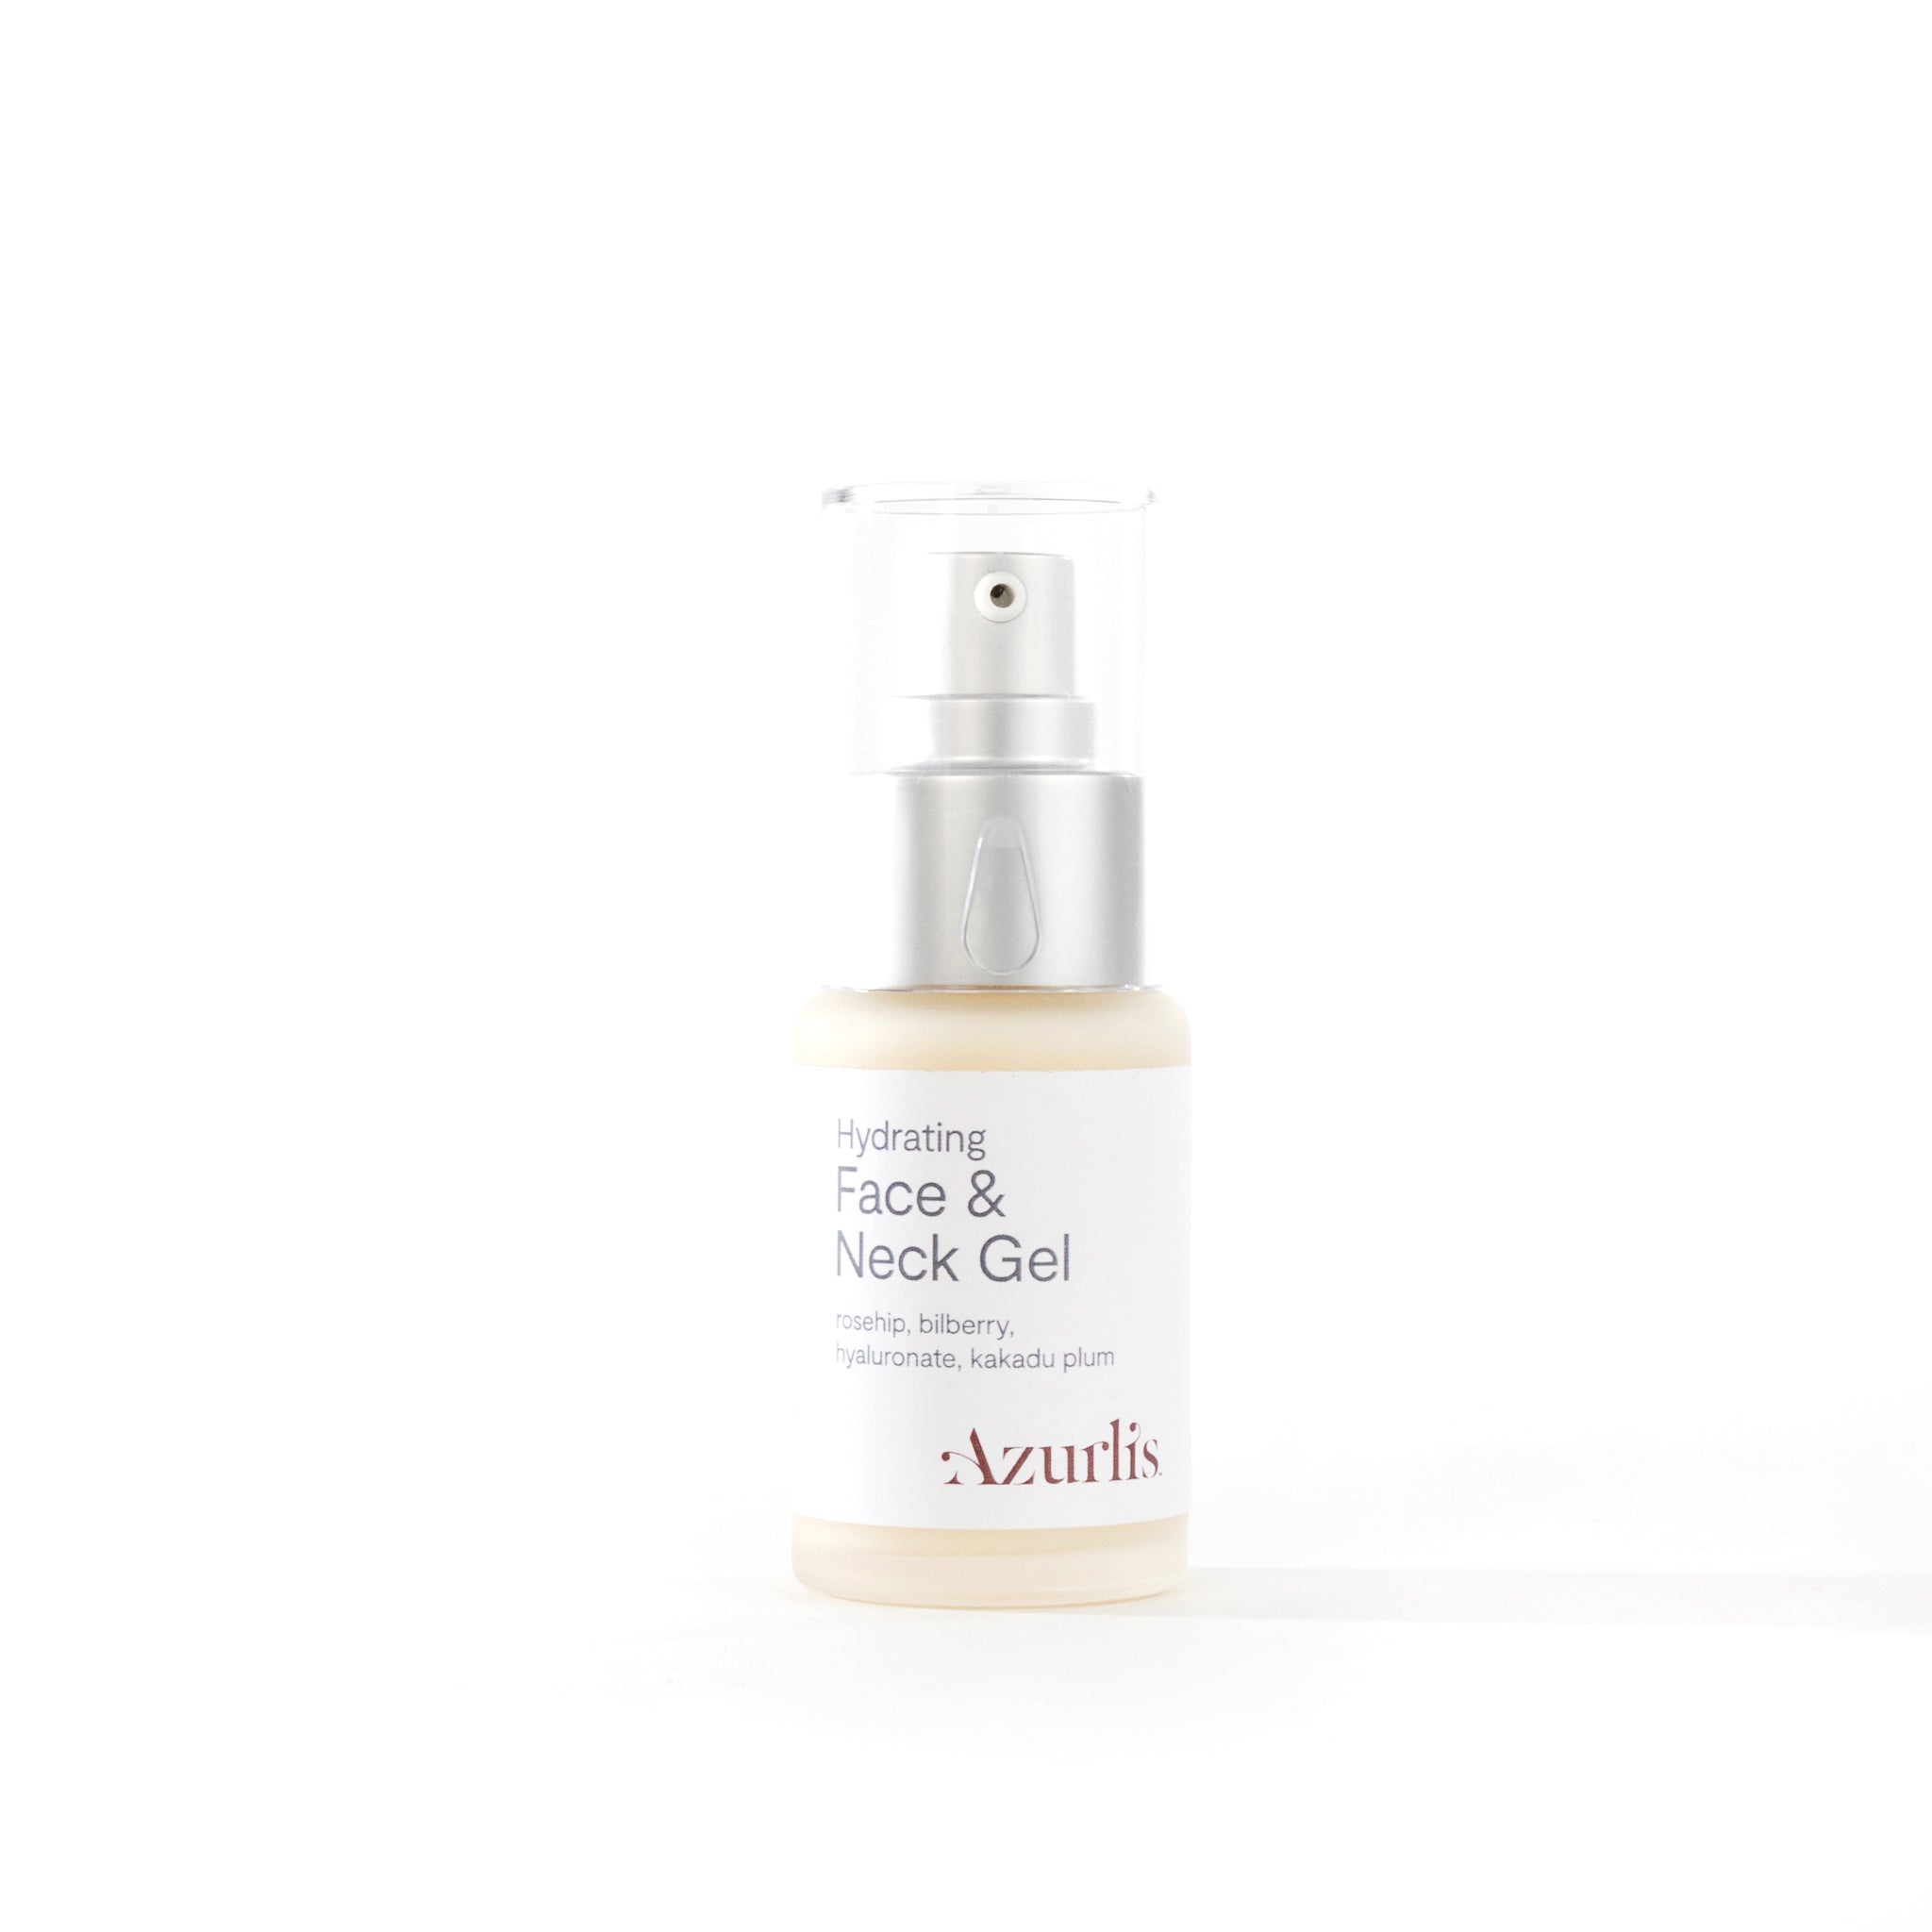 Azurlis™ Hydrating Face &amp; Neck Gel - Serum 30ml is a real nourishing hydrating gel, cream, serum star product, superb for all skin types, to protect against premature ageing!